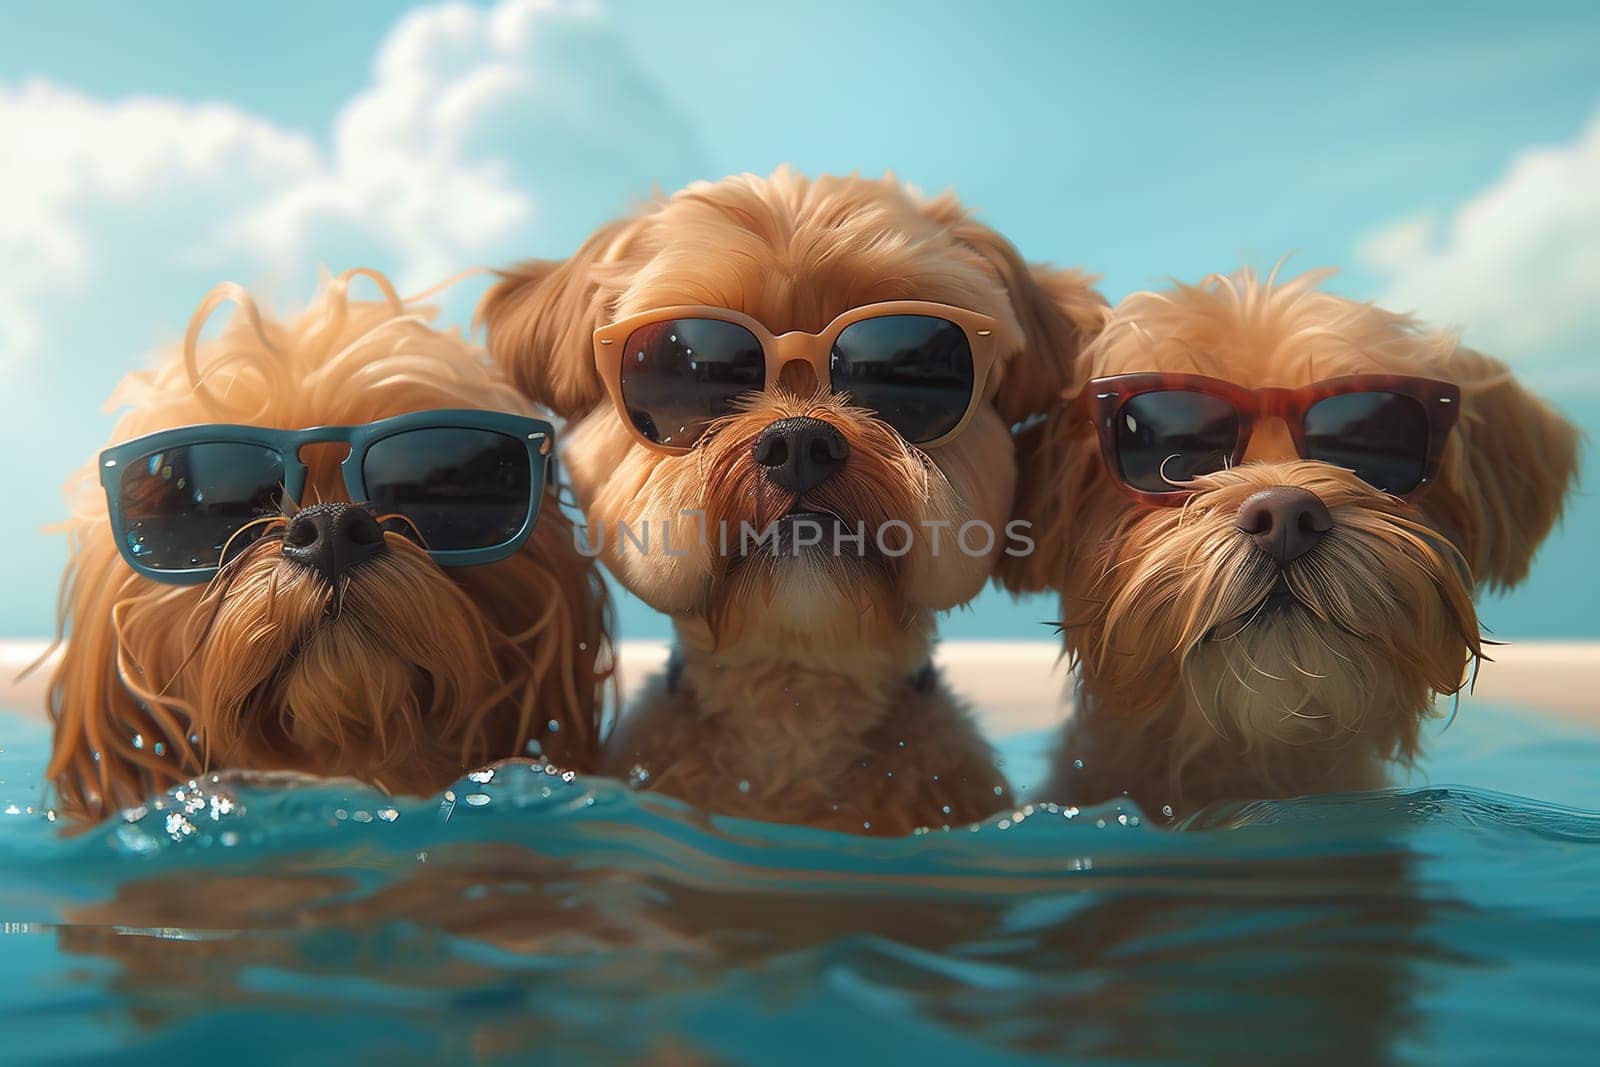 cute dogs swimming and play in the swimming pool by Andelov13